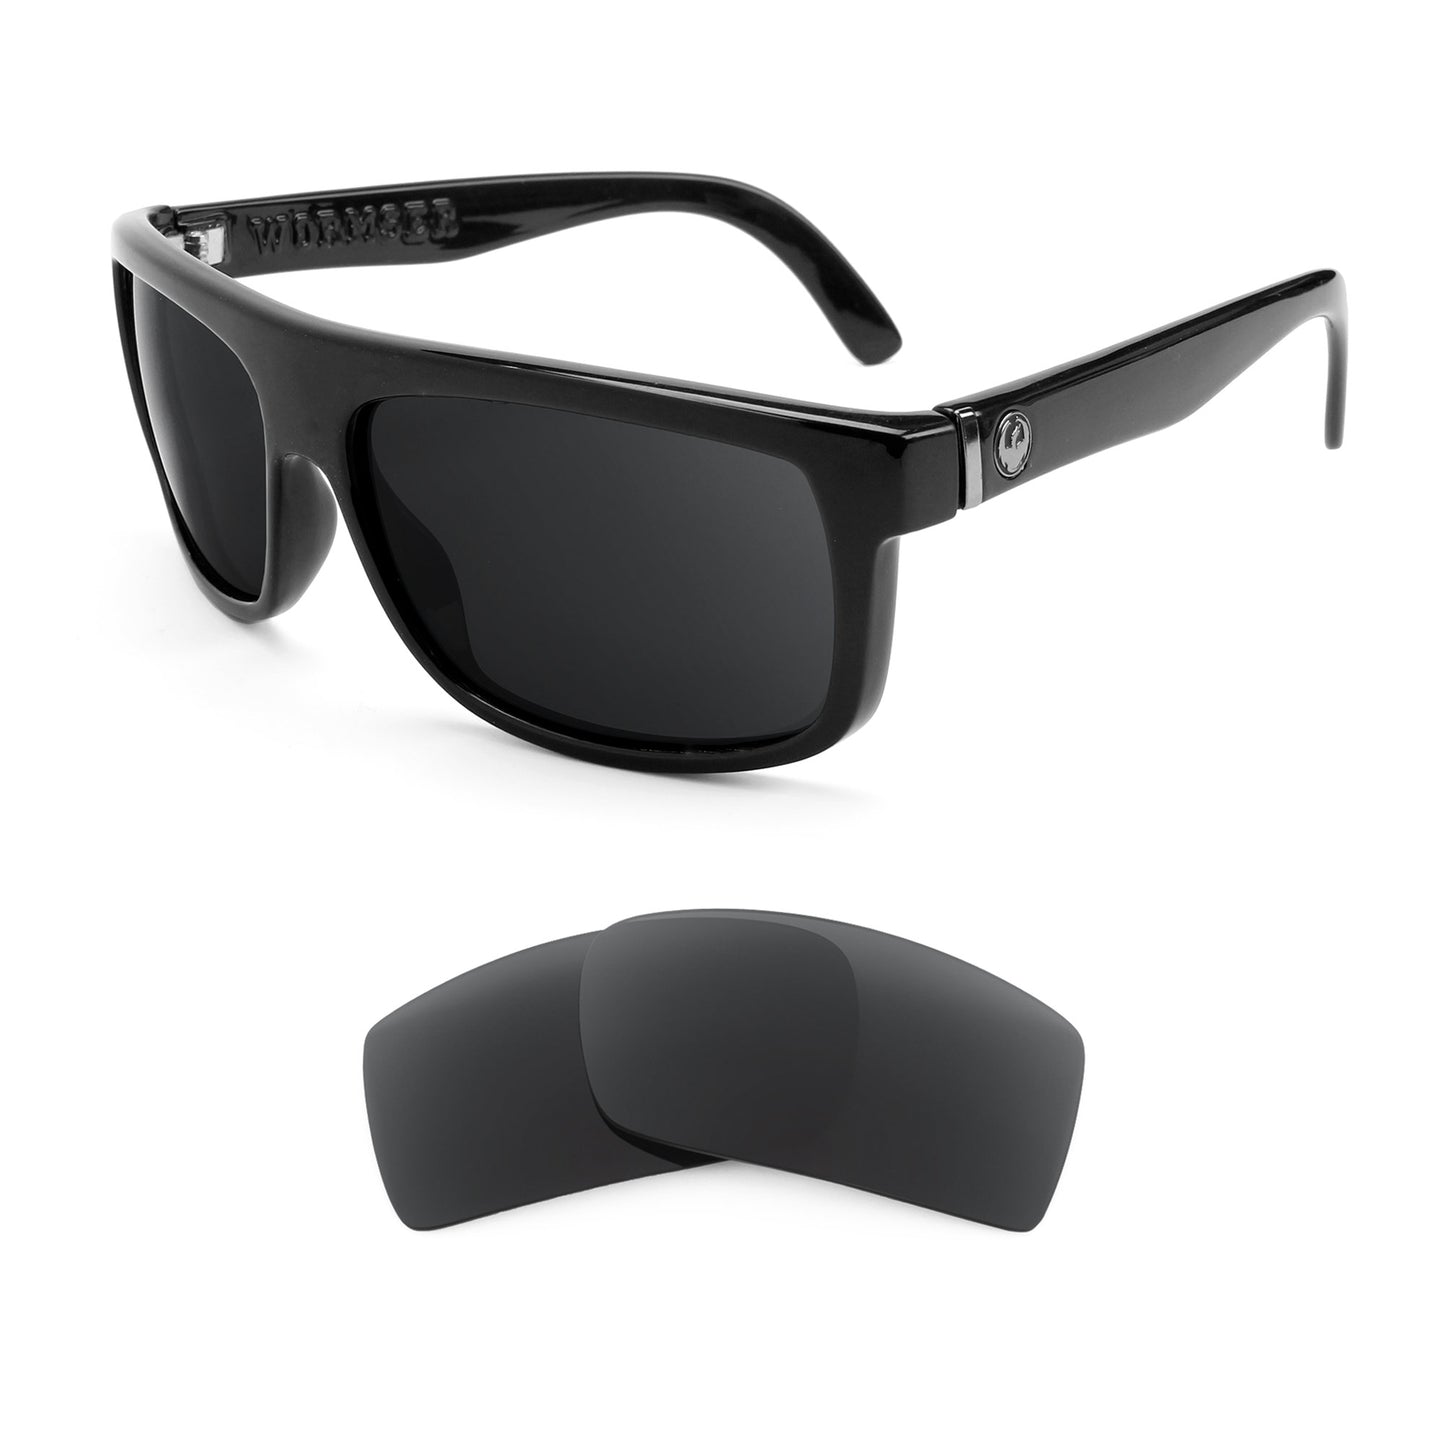 Dragon Wormser sunglasses with replacement lenses